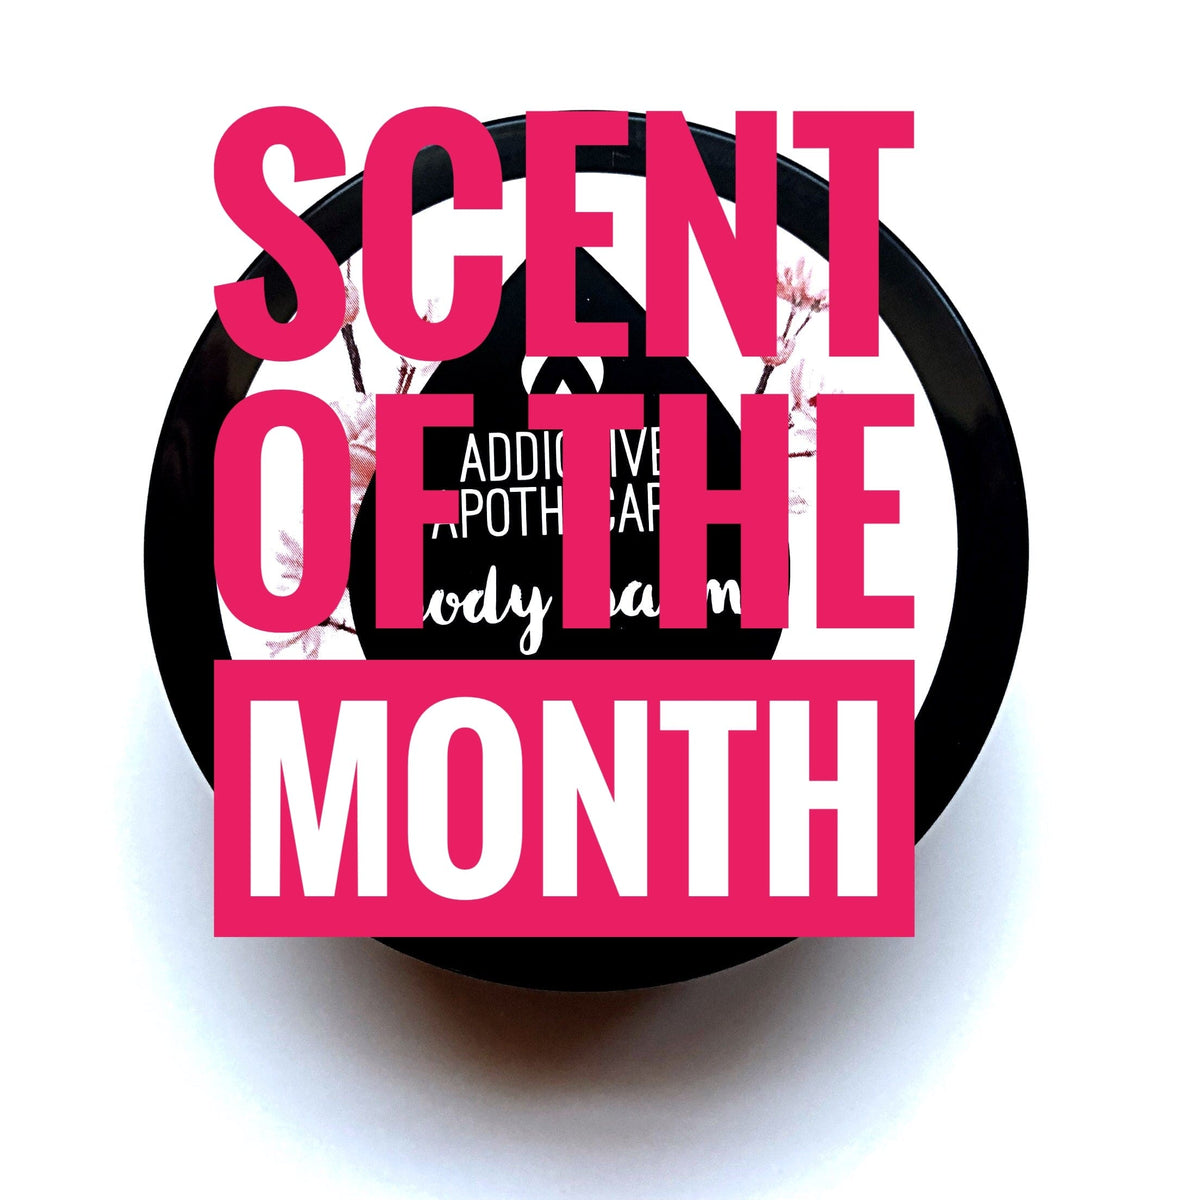 Scent of the Month